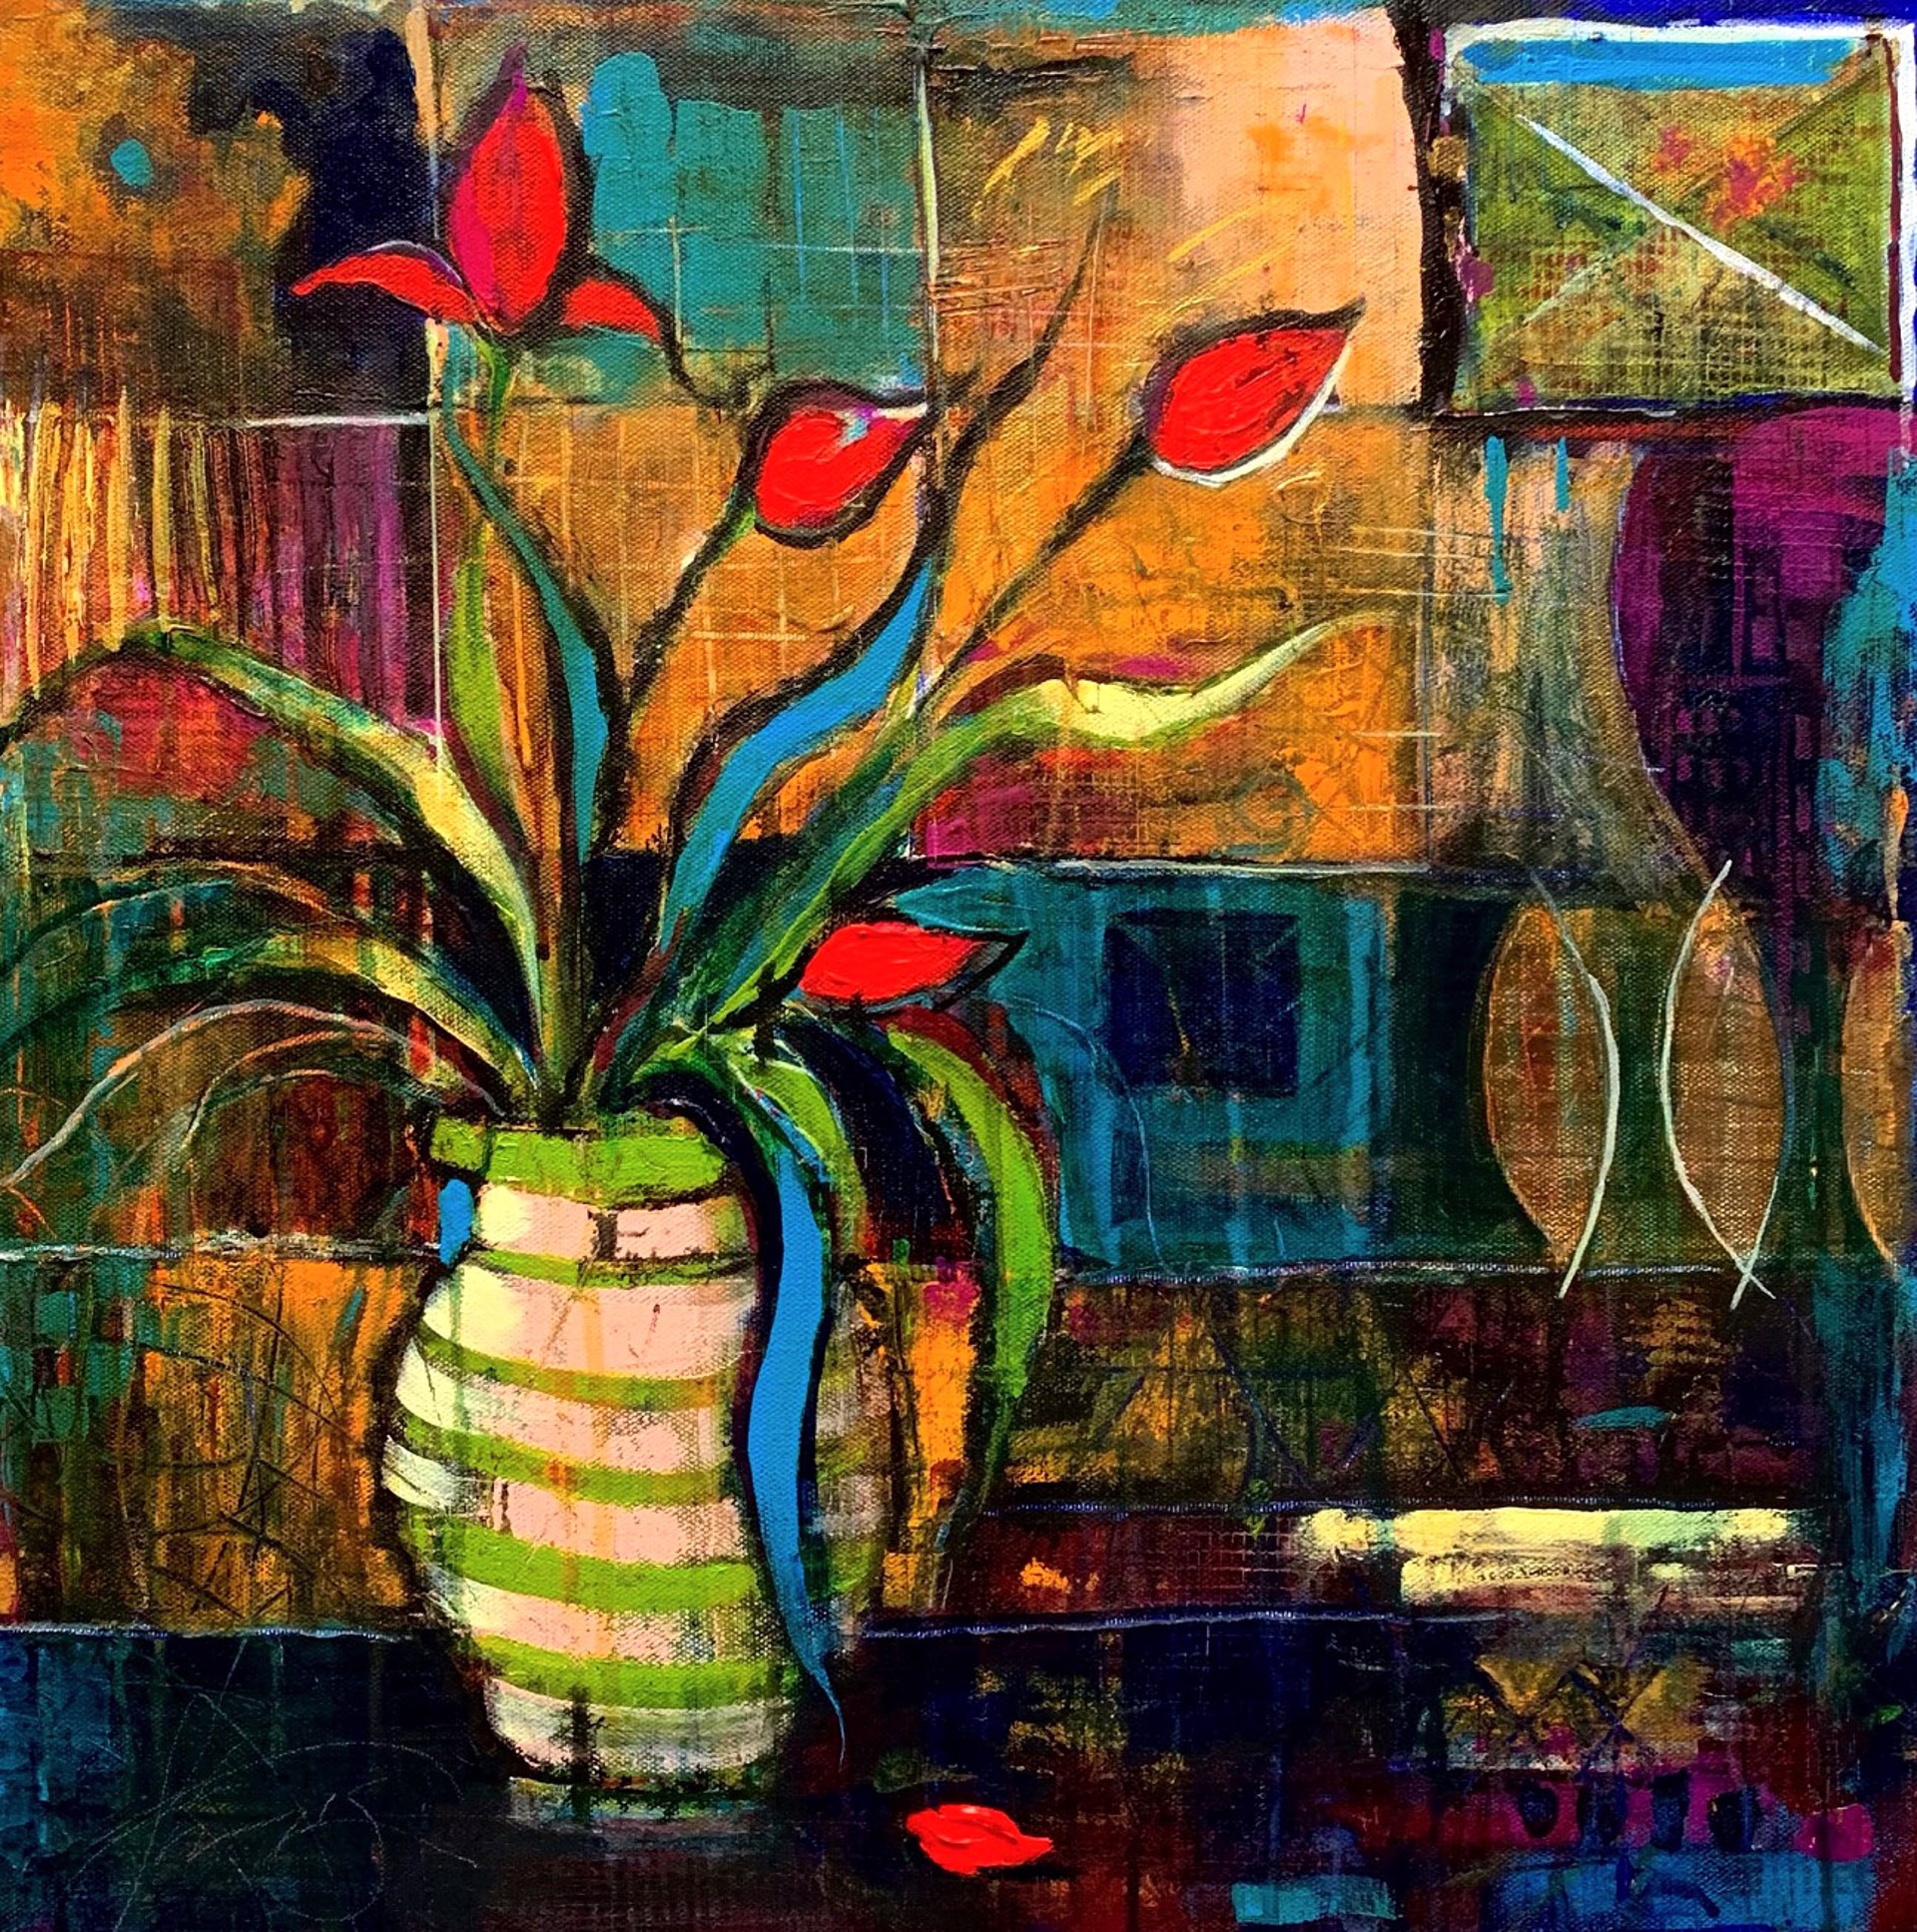 Red Tulips in a Striped Vase by Tony Sturgis